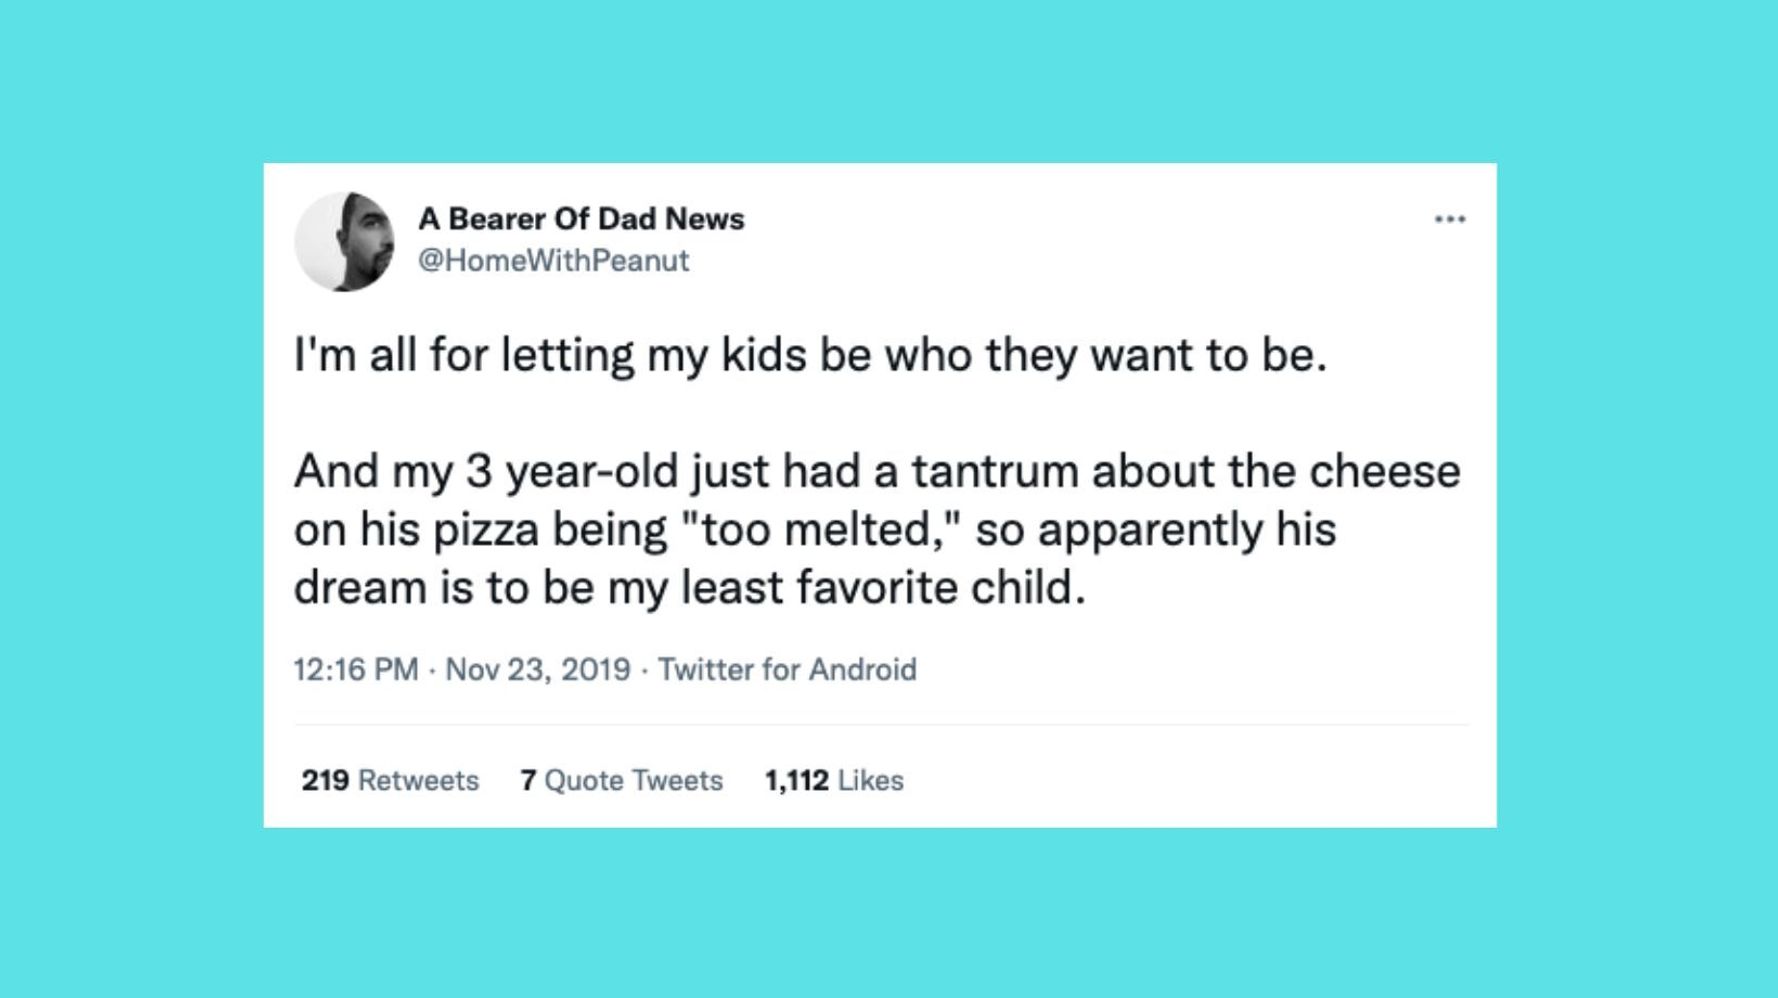 Funny Tweets About The Reasons For Kids' Tantrums